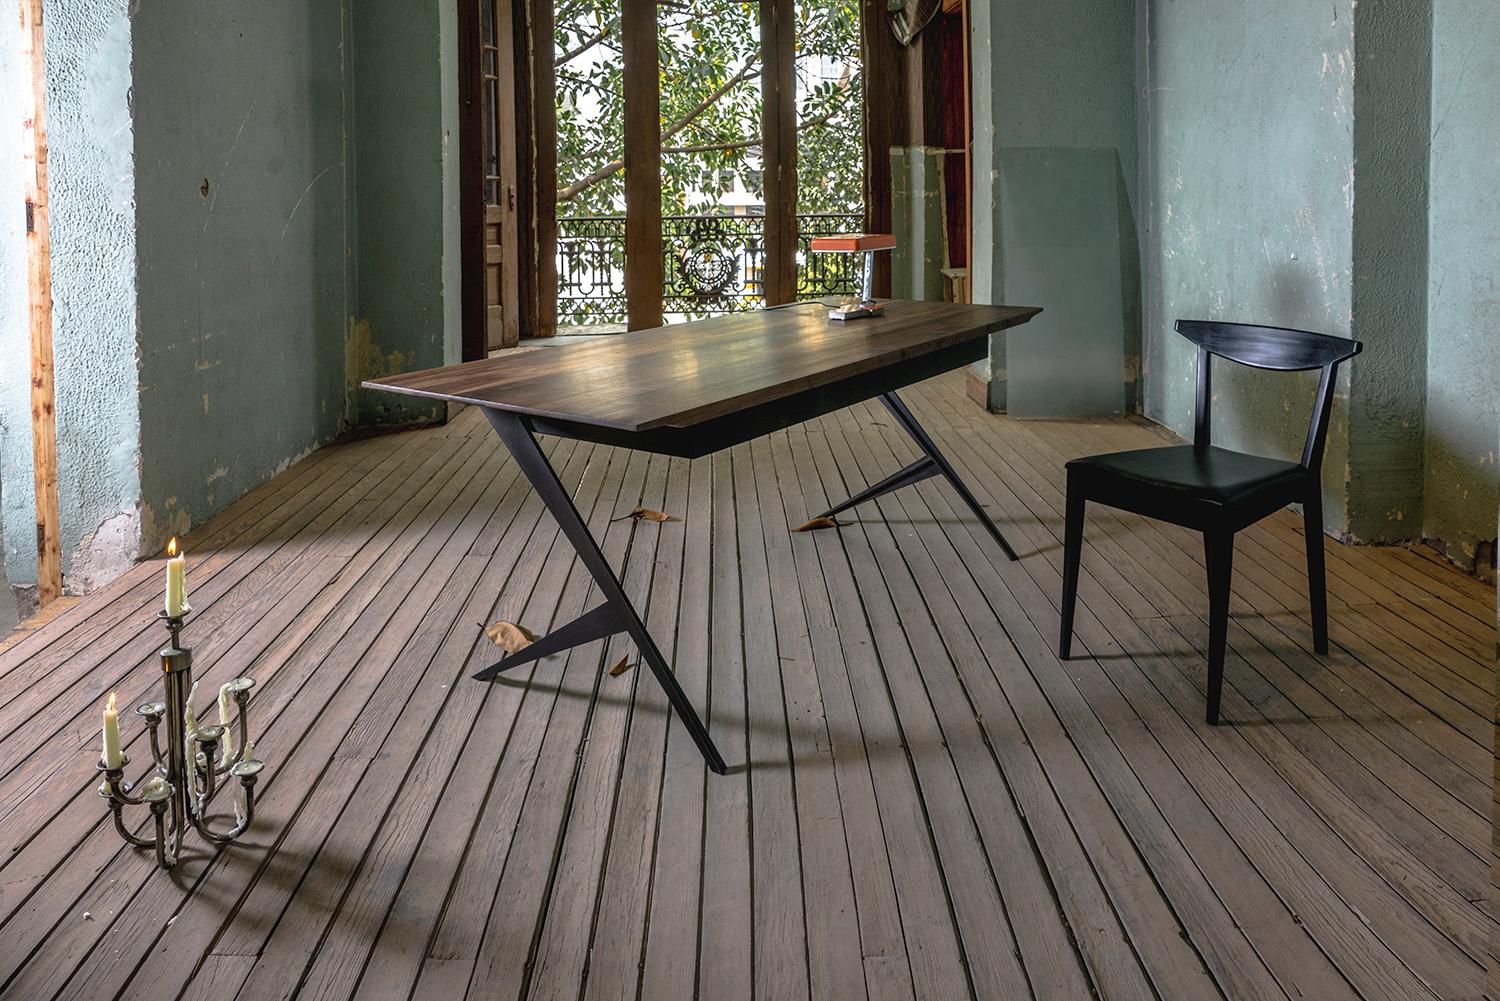 Mantis desk by Atra Design
Dimensions: D 120 x W 80 x H 72 cm
Materials: walnut wood, steel
Other top materials available.

Atra Design
We are Atra, a furniture brand produced by Atra form a mexico city–based high end production facility that